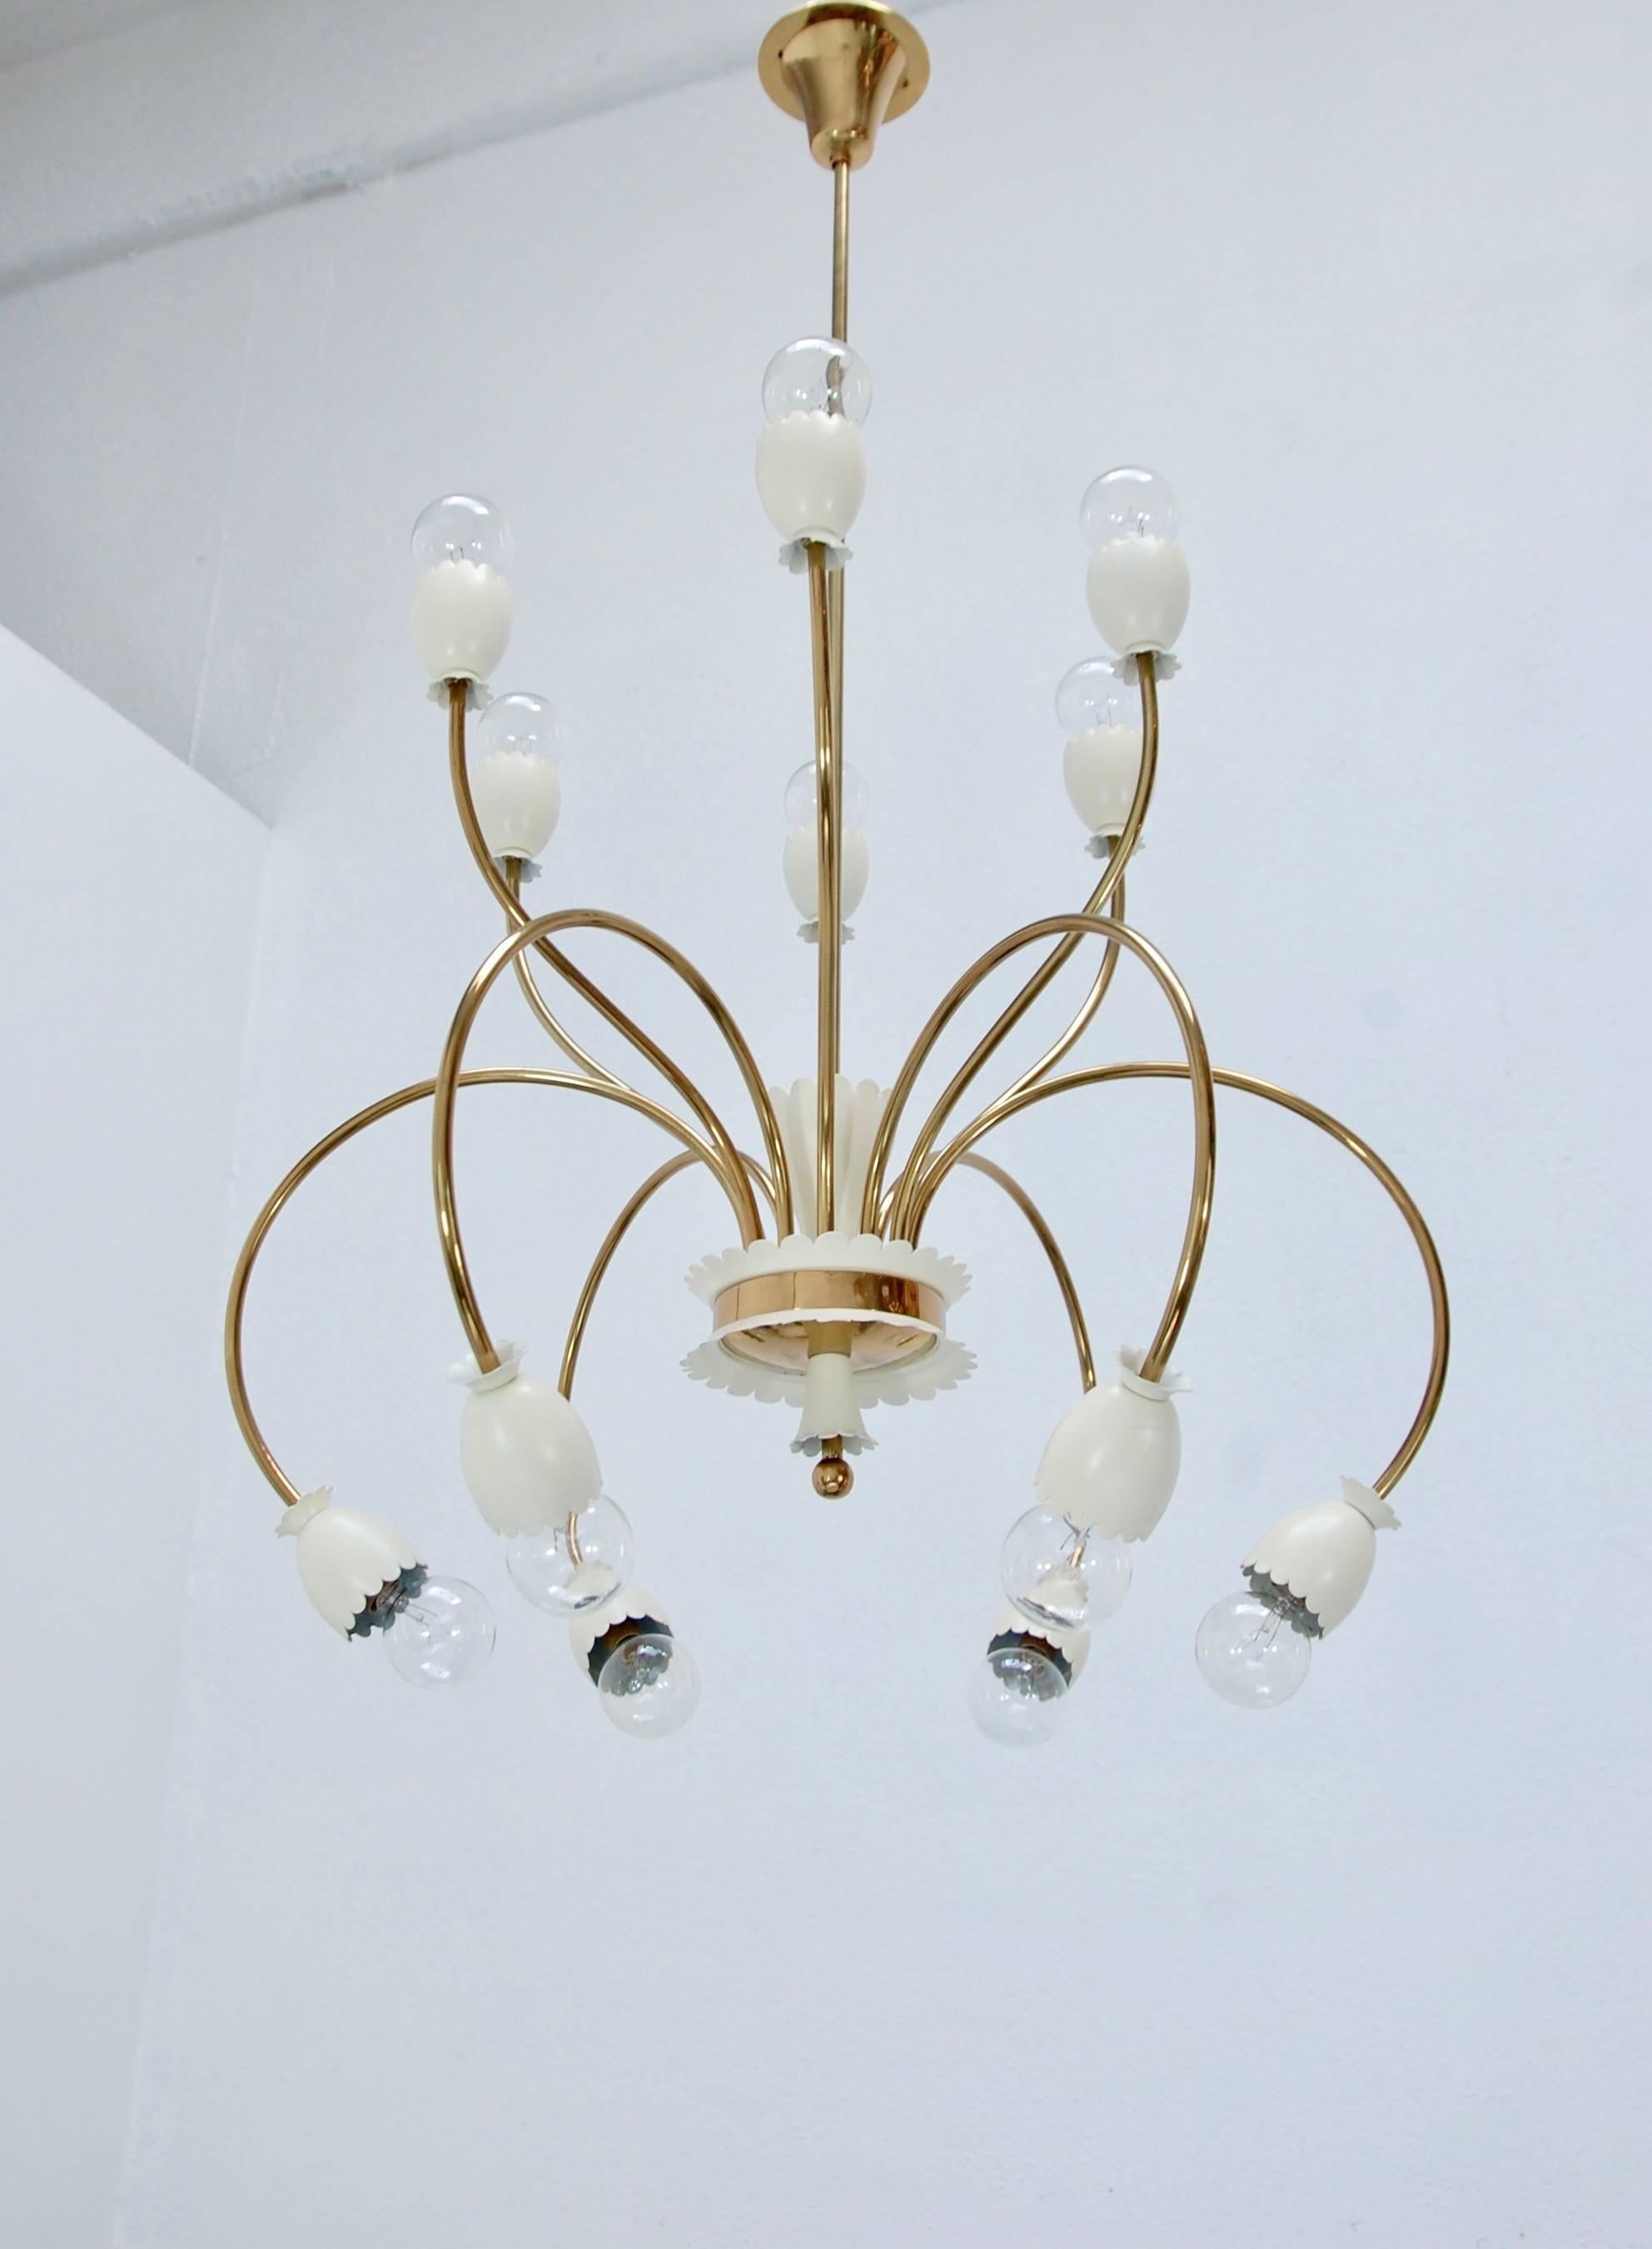 Of the period large brass Italian 1950s twelve-light chandelier botanical chandelier. Fully restored with E12 candelabra based sockets, wired for the US. Patina lacquered brass finish and painted aluminum decorative cups. 

Overall drop: